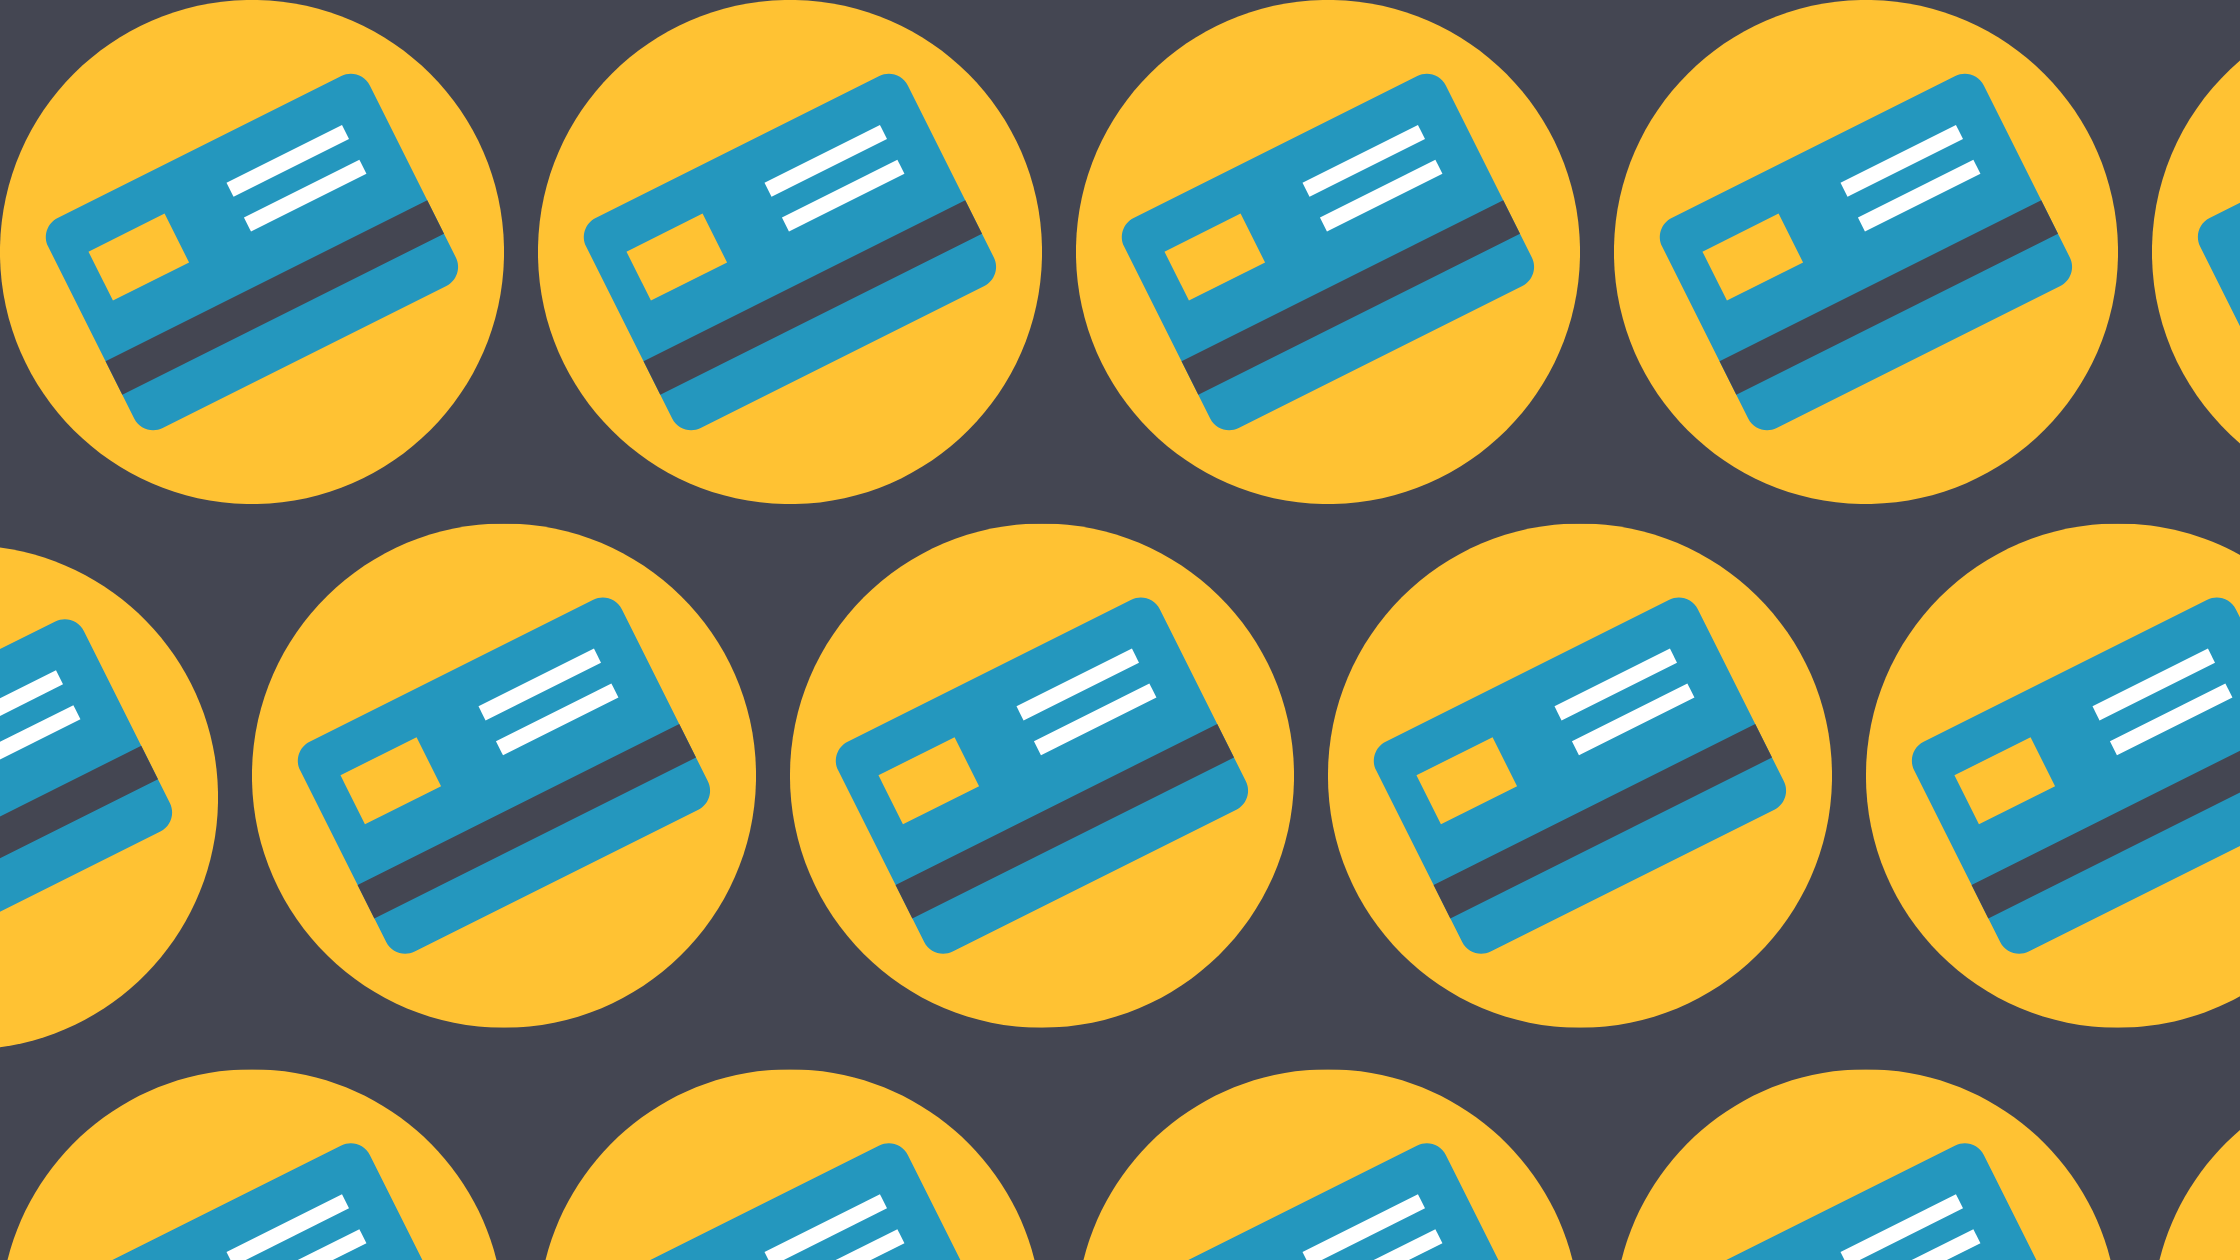 A repeating pattern of credit cards in circular icons